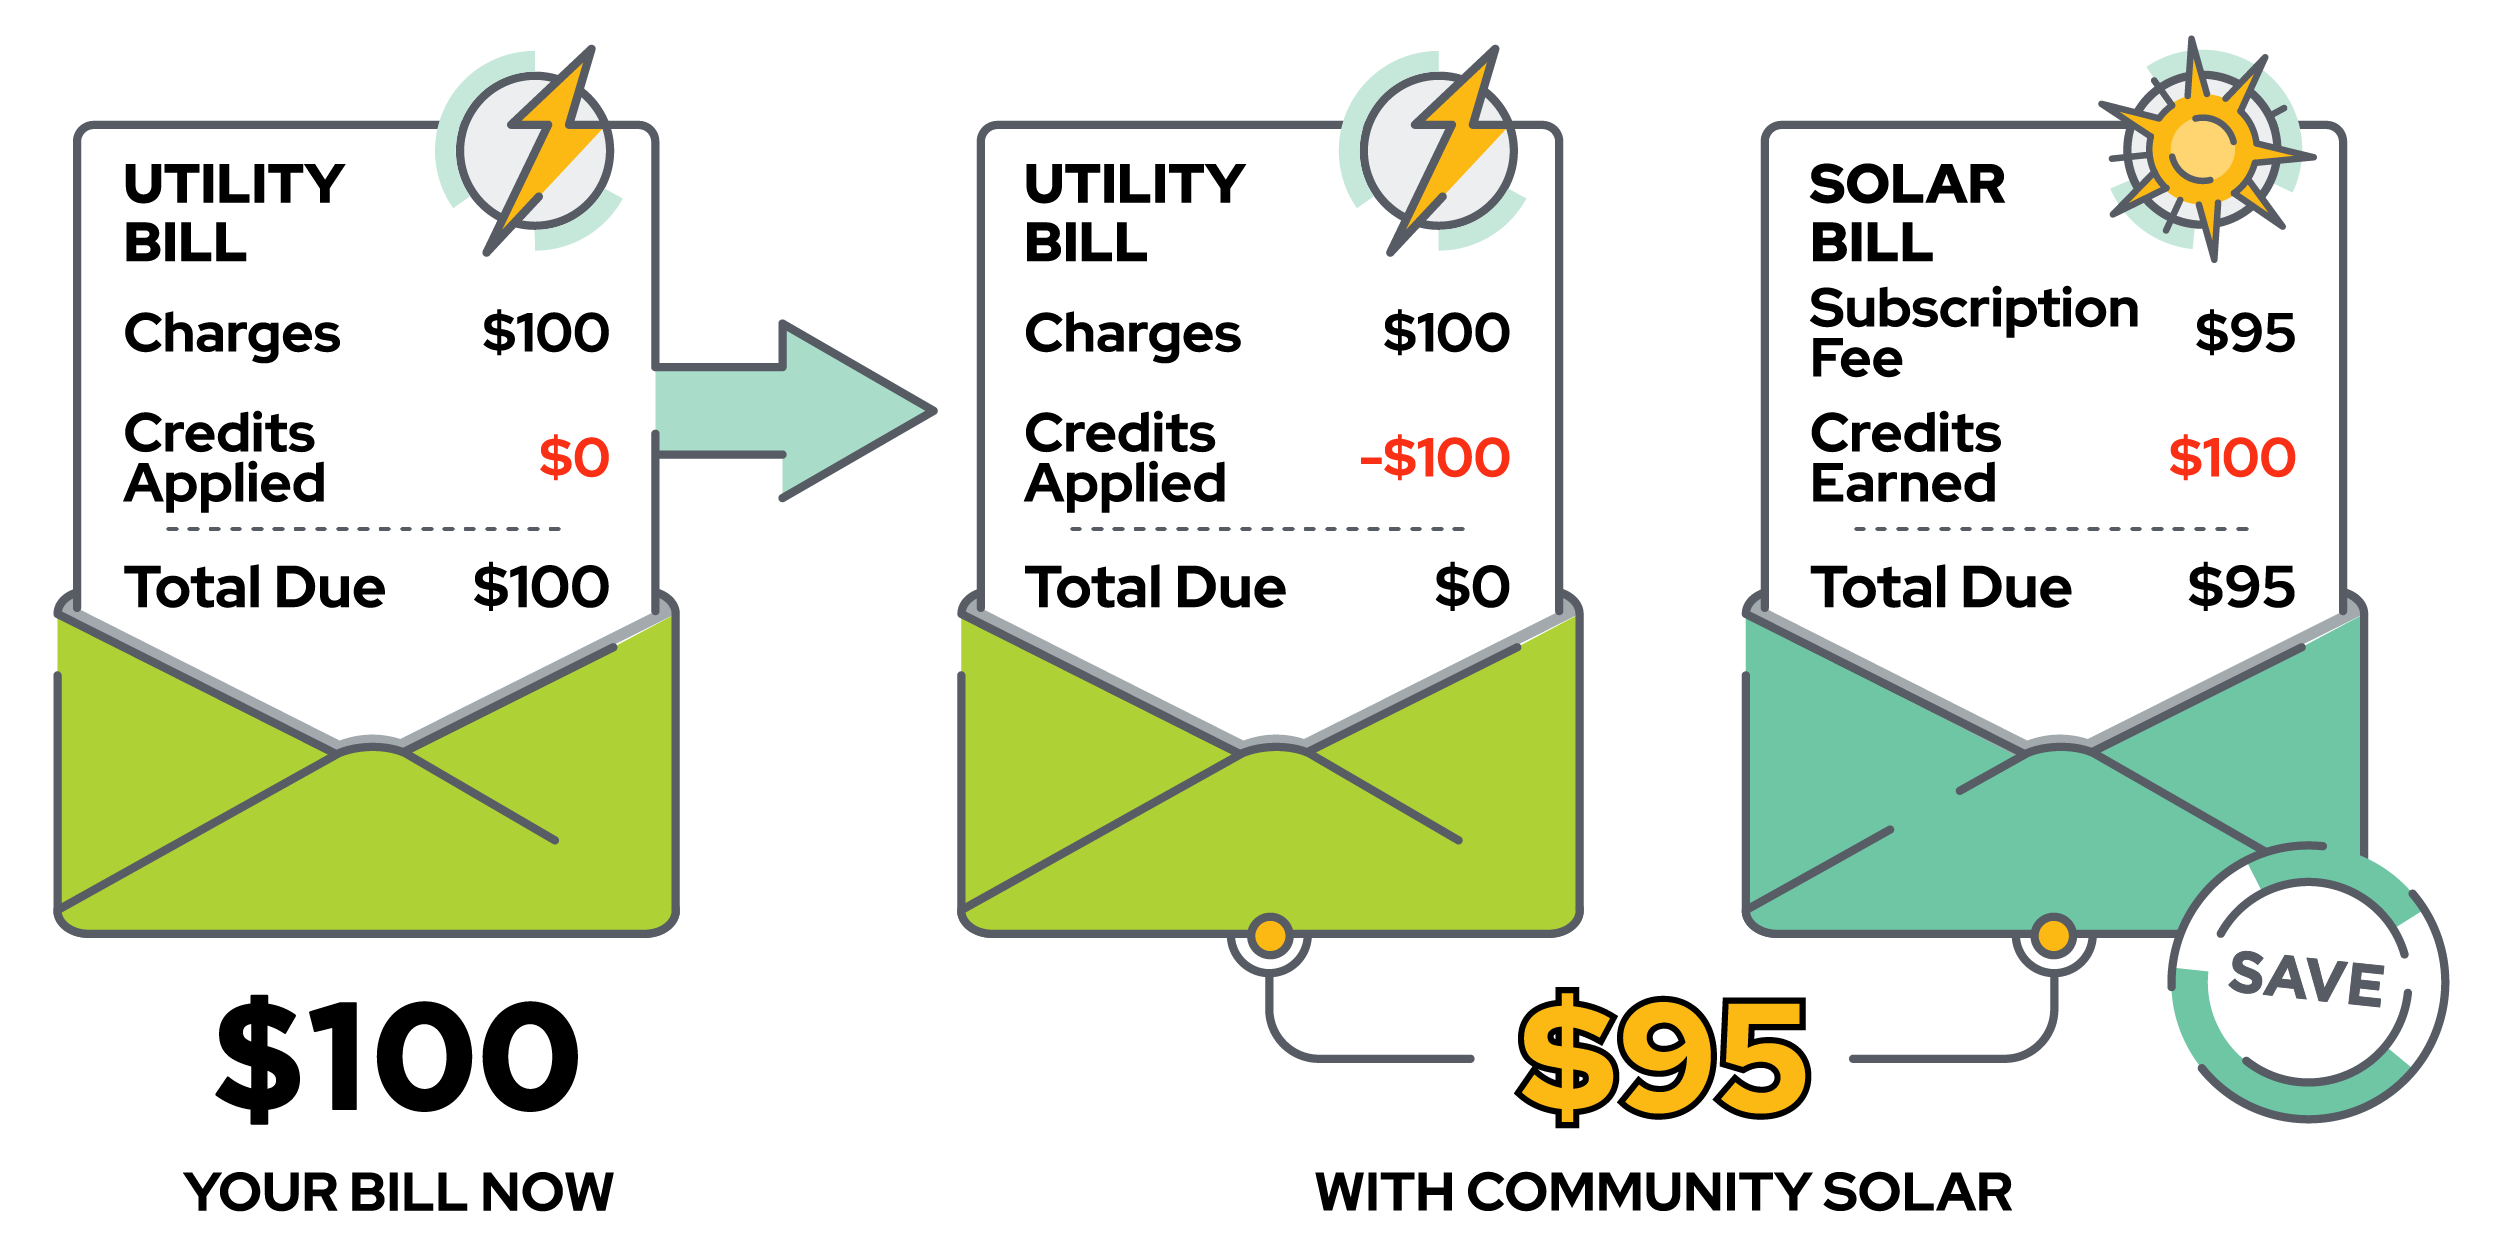 2 Utility Bills side by side. The Community Solar bill is $5 cheaper than your bill now.